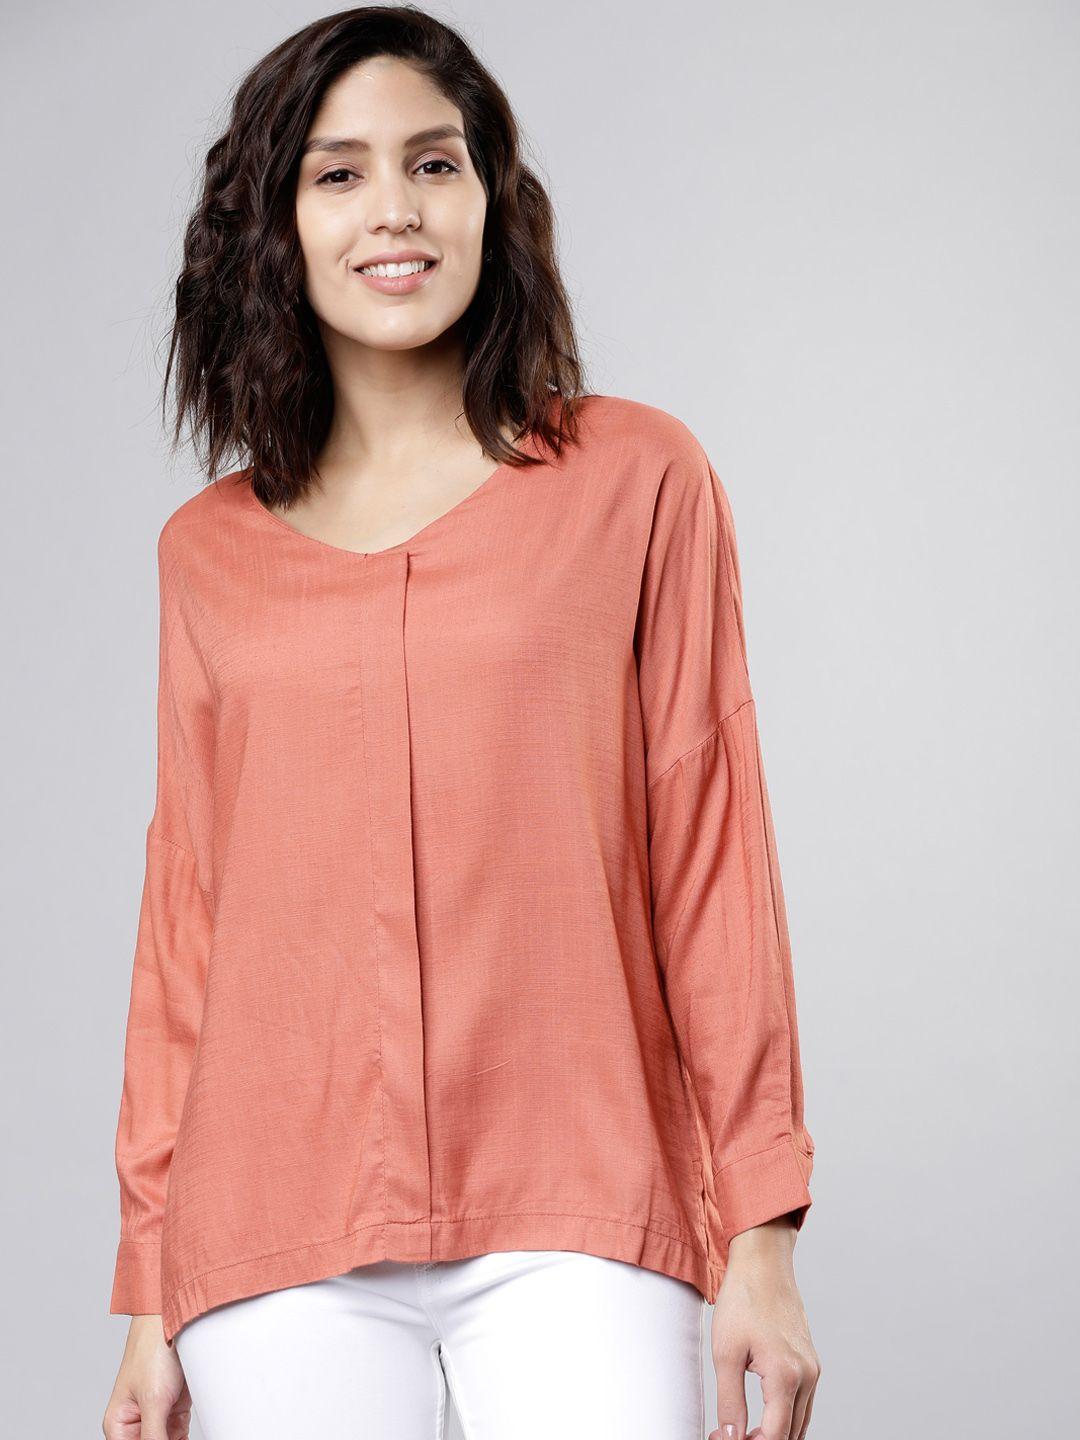 tokyo-talkies-women-rose-coloured-solid-a-line-top